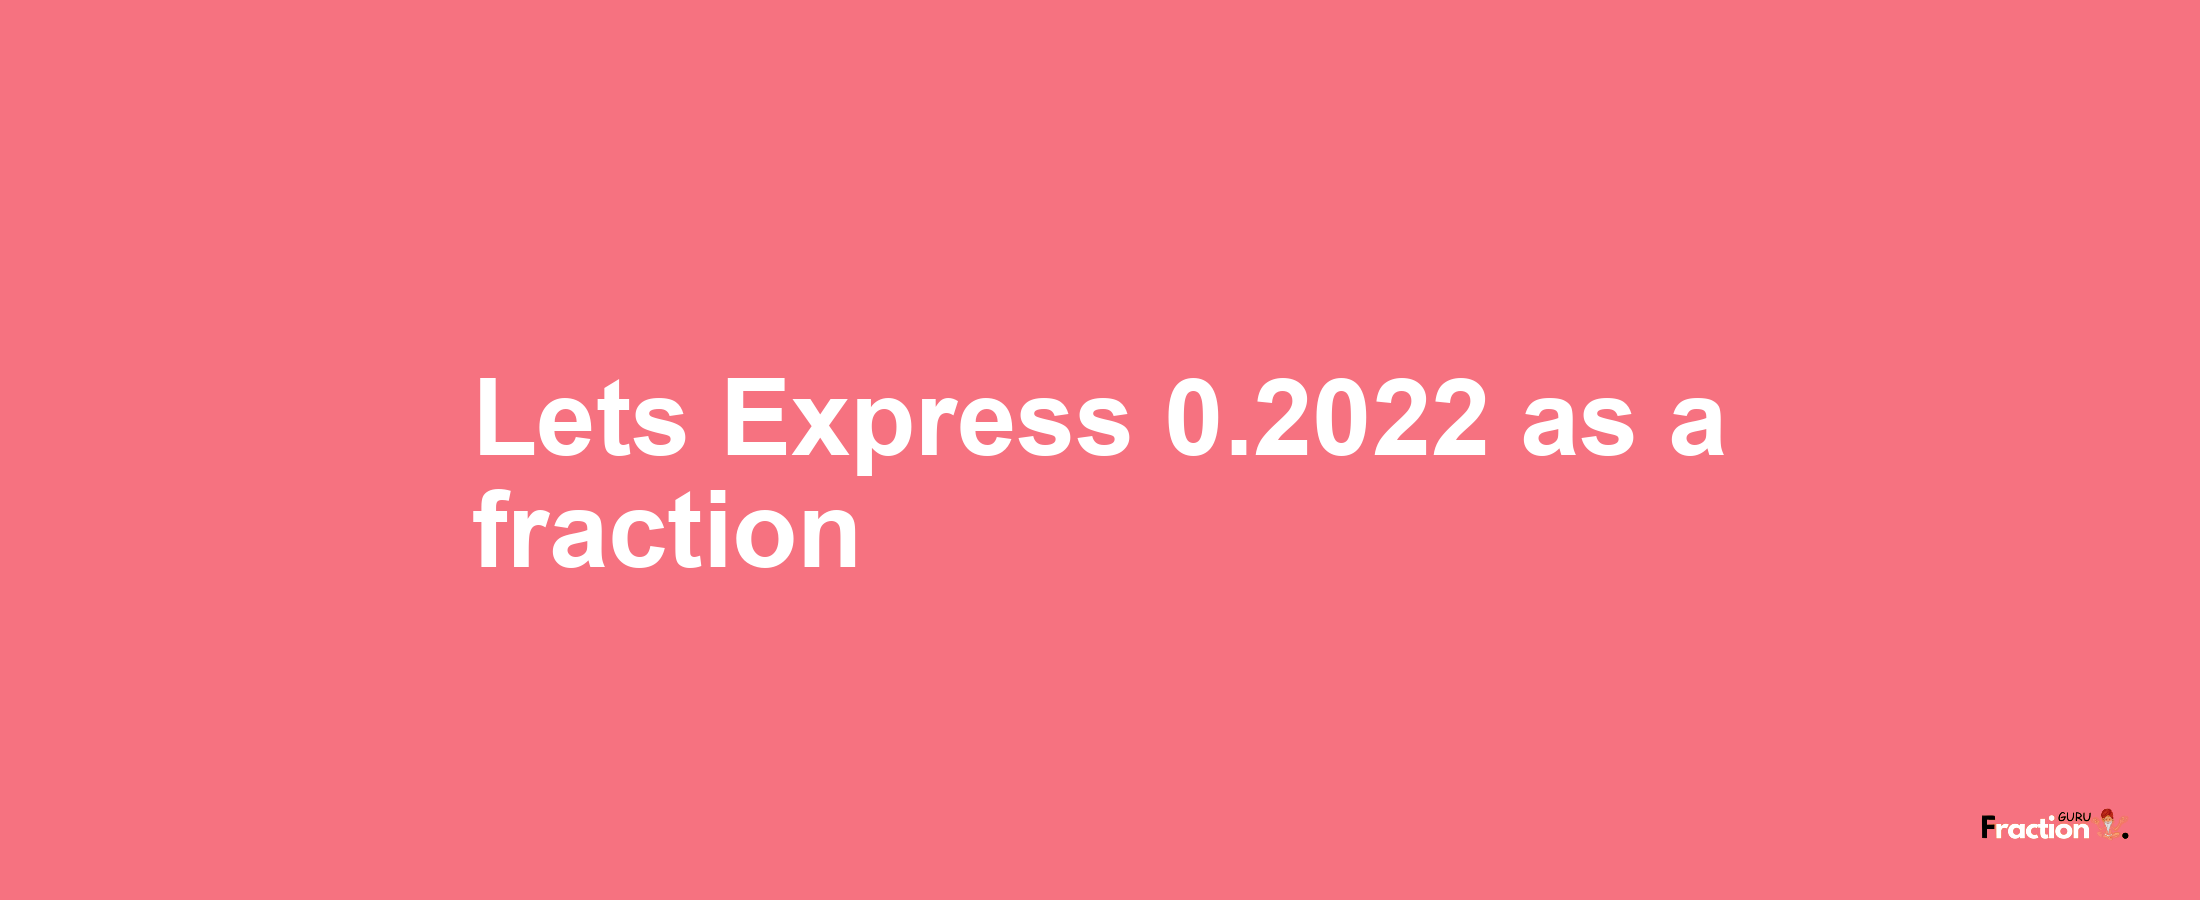 Lets Express 0.2022 as afraction